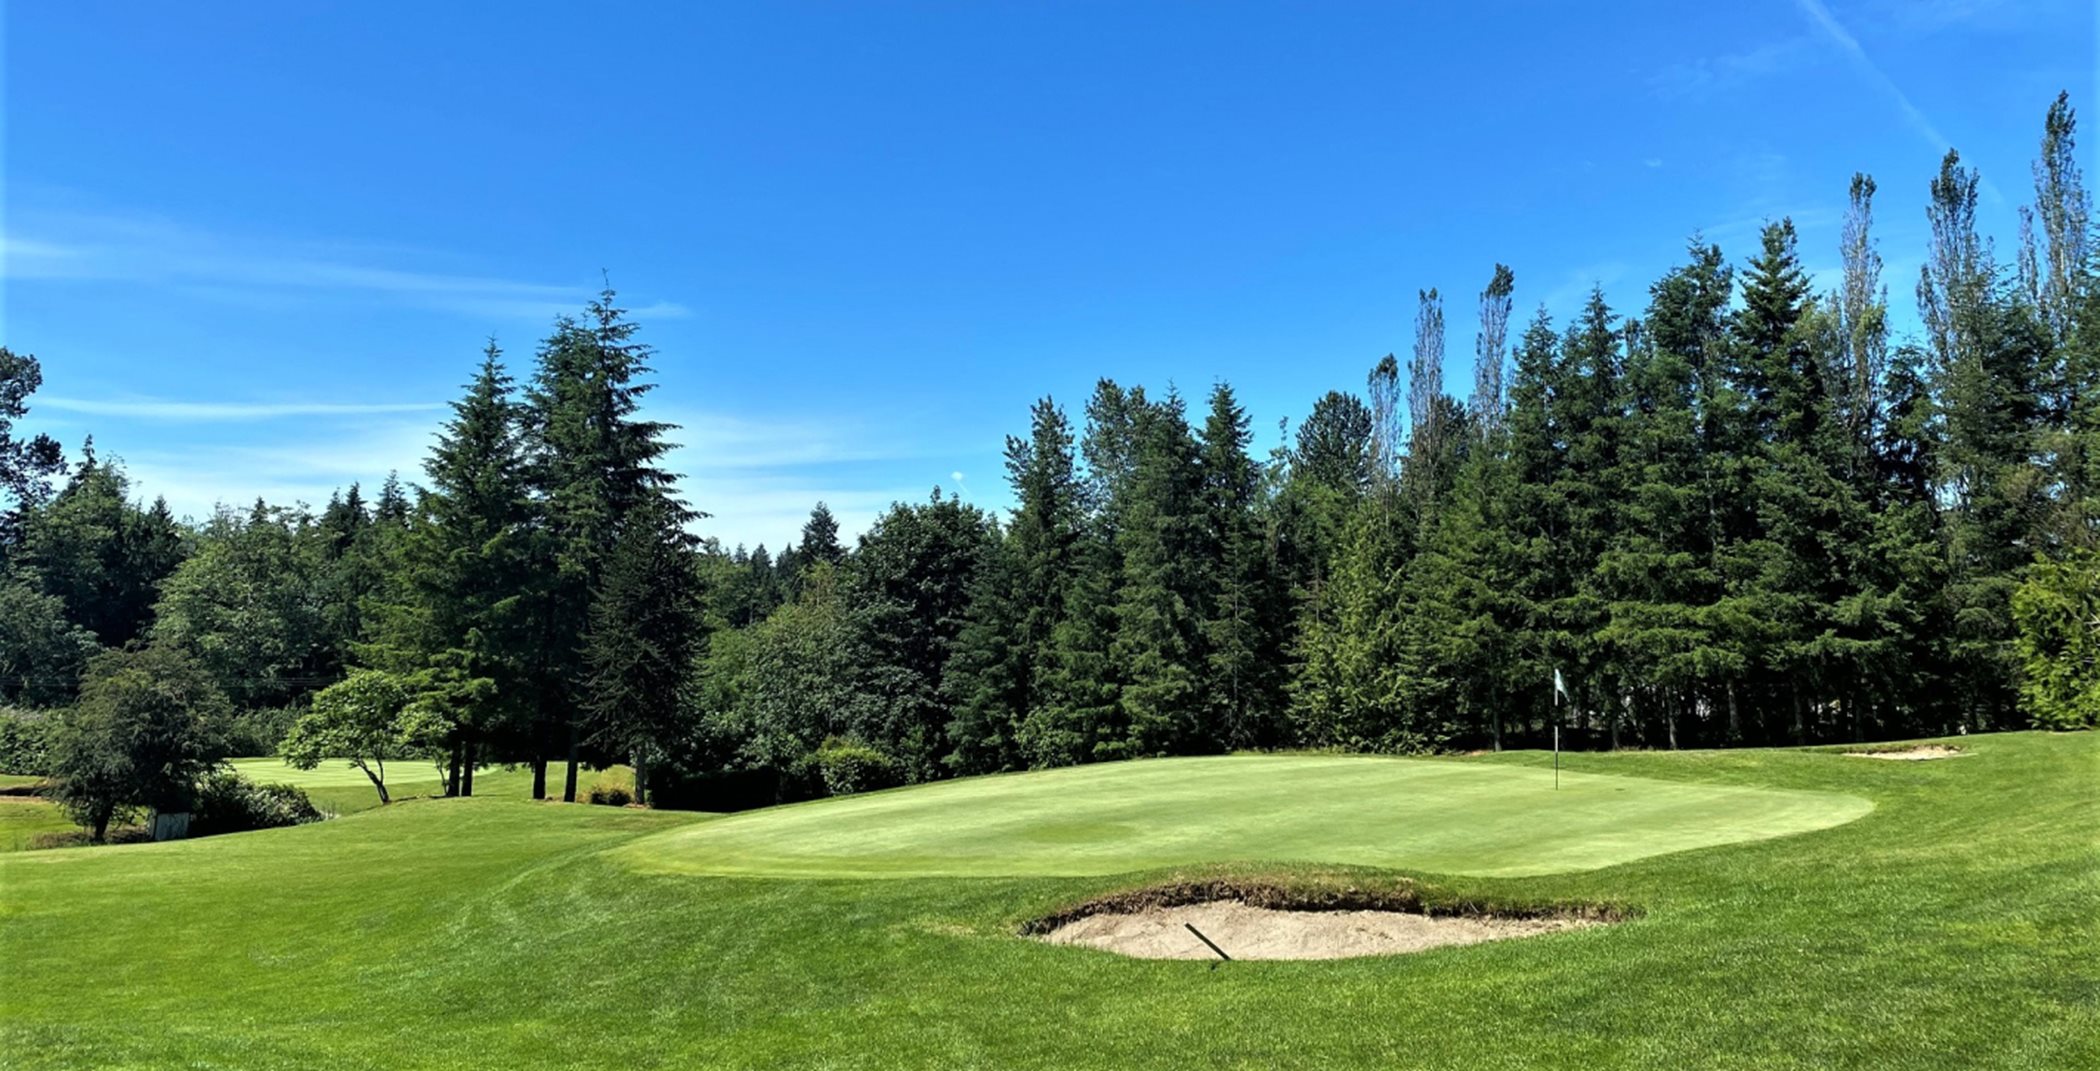 Golf course surrounded by evergreen trees